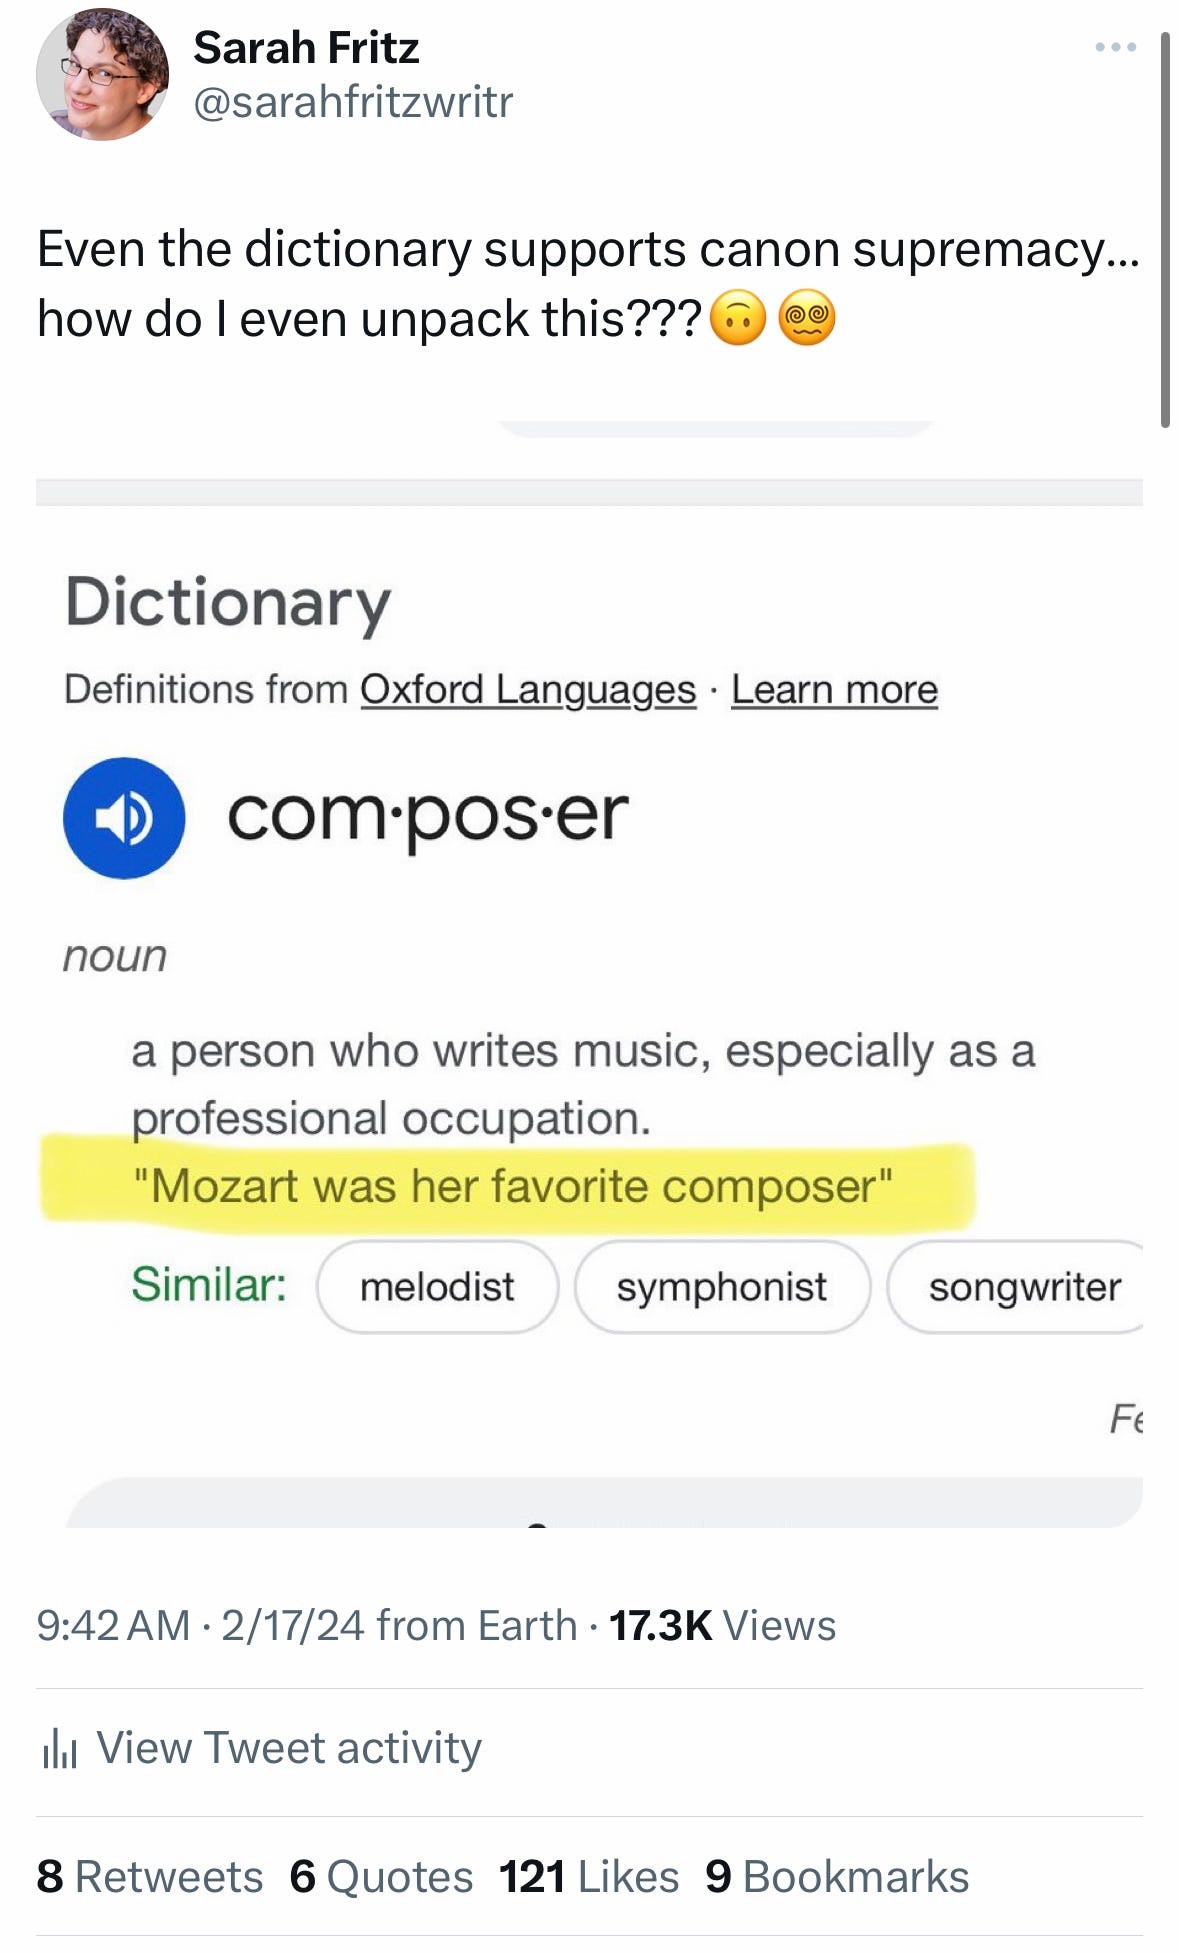 even the dictionary promotes canon supremacy... how do I even unpack this? [image of definition of composer with sample sentence "Mozart was her favorite composer."